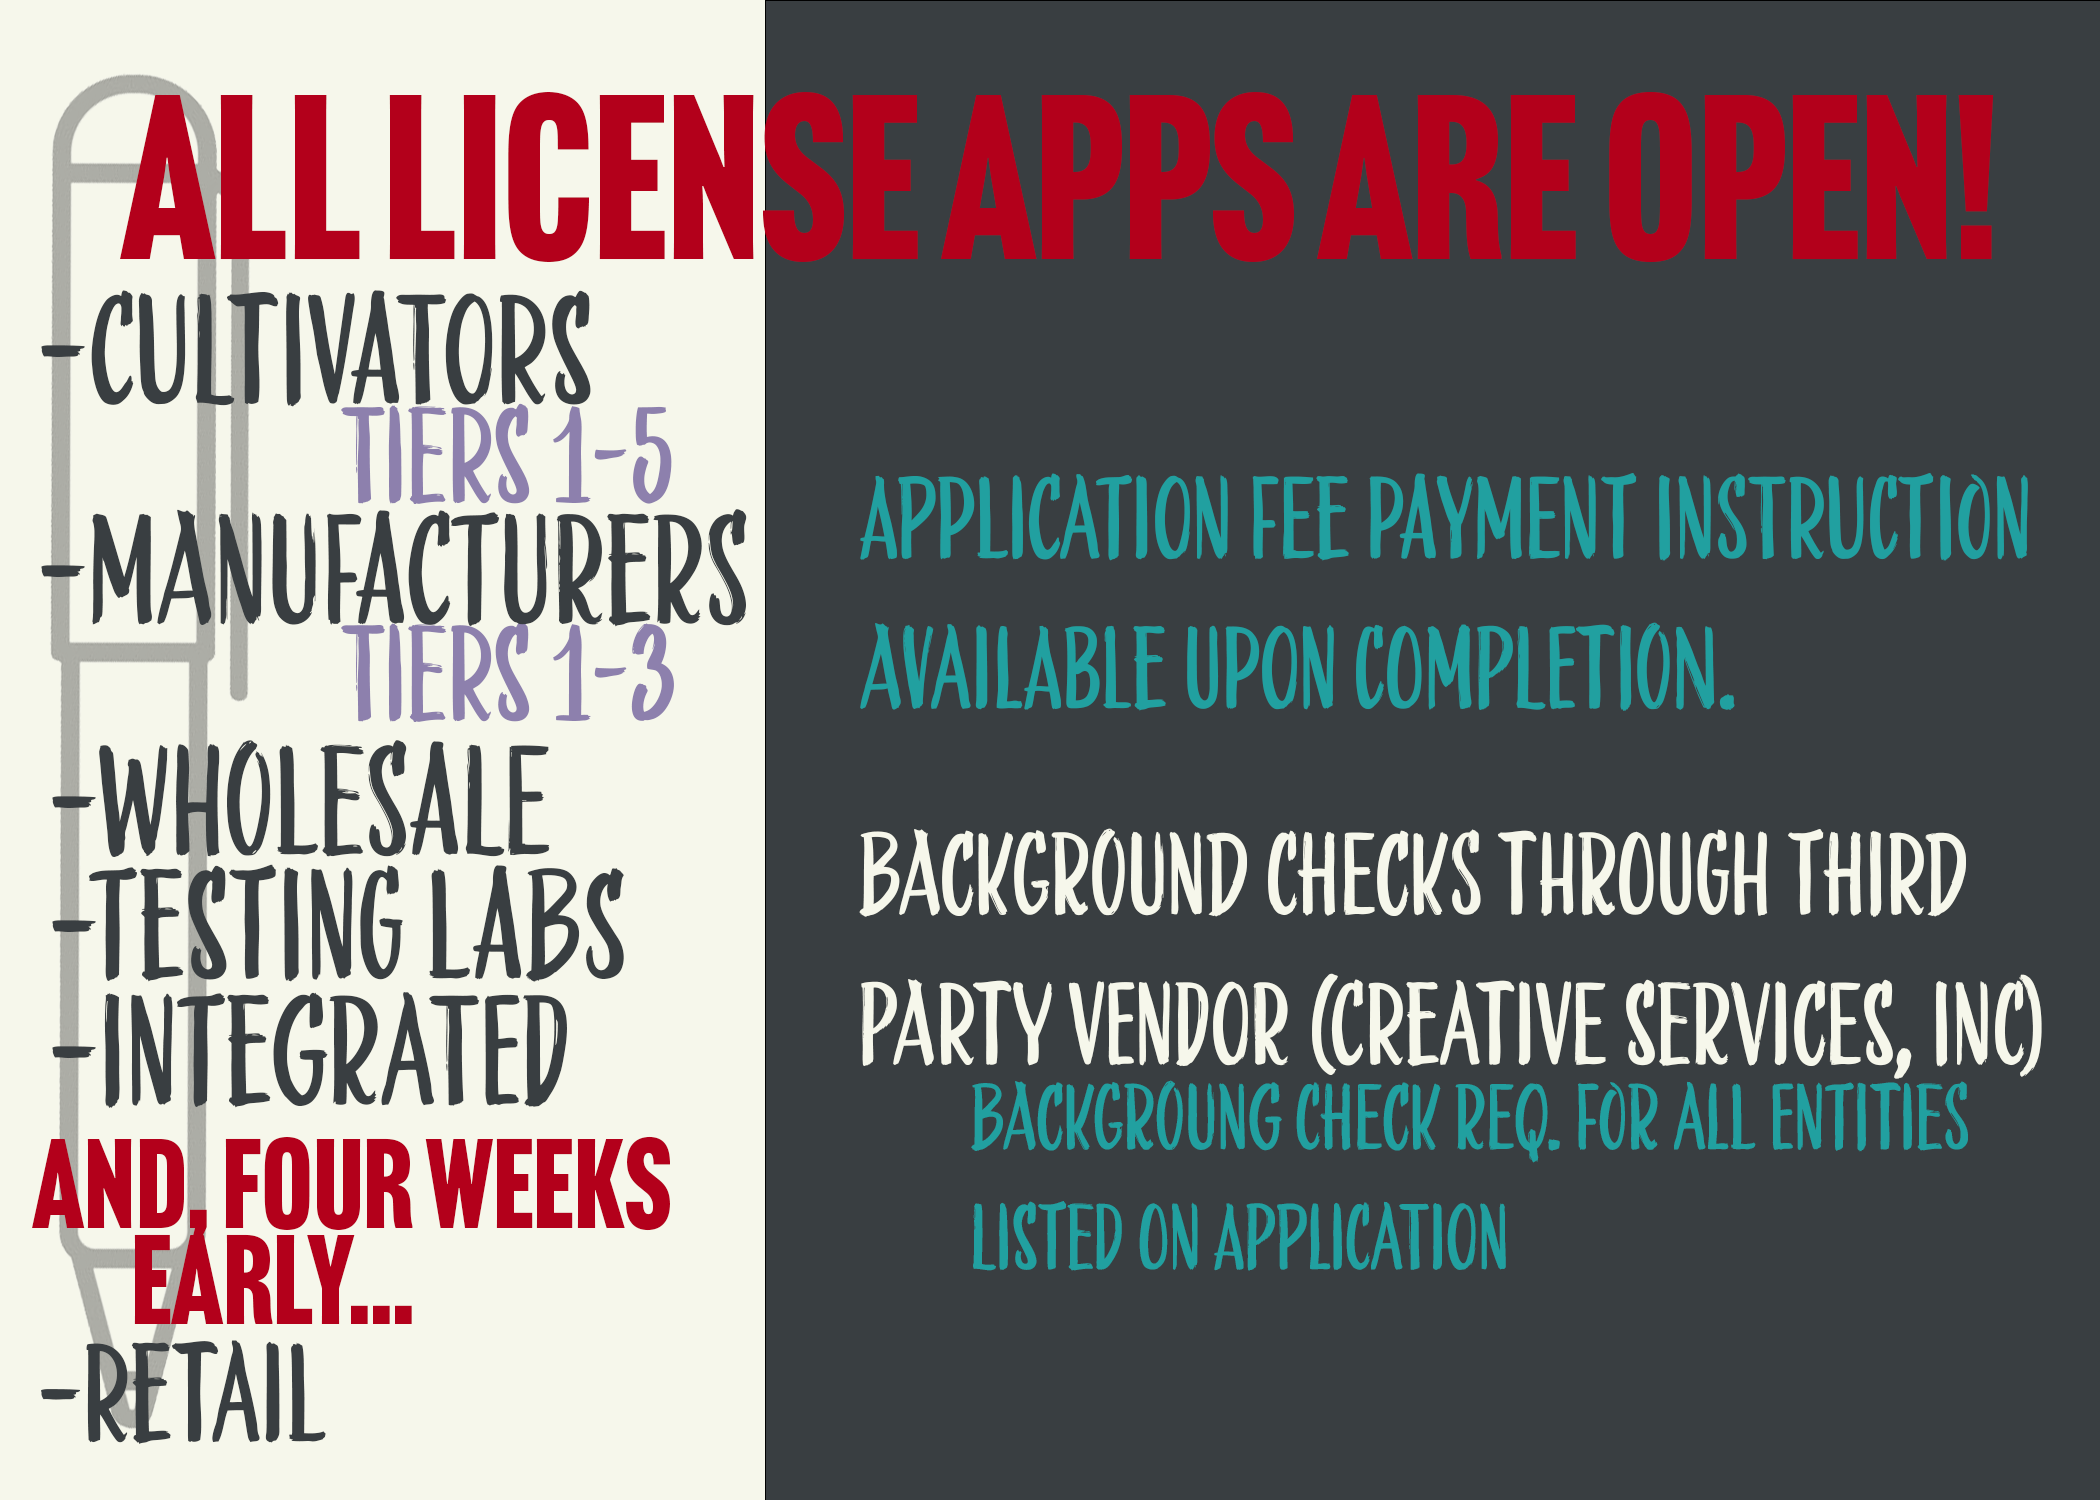 License Applications are open for manufacturing, wholesale, cultivation, testing labs, and integrated